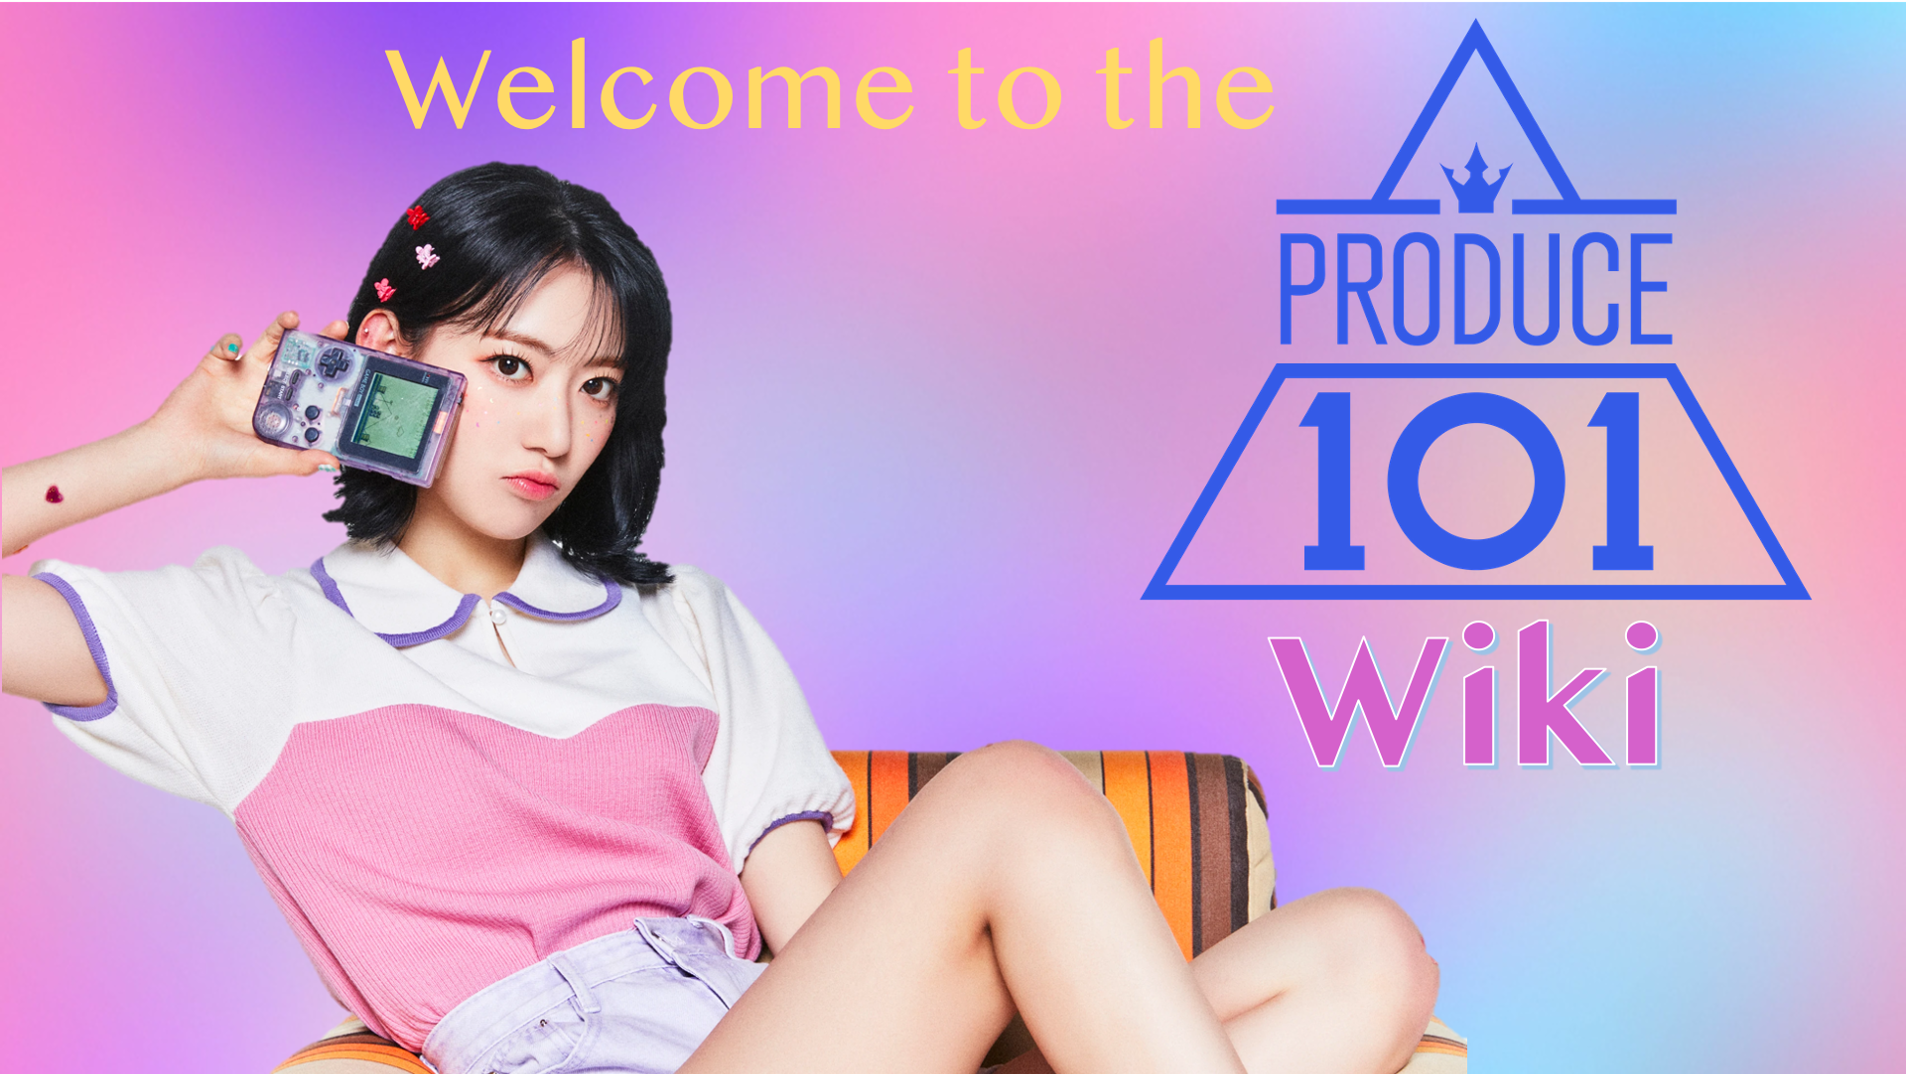 https://static.wikia.nocookie.net/produce-101/images/1/16/Produce_101_Wiki_Banner_3.png/revision/latest?cb=20200619141256